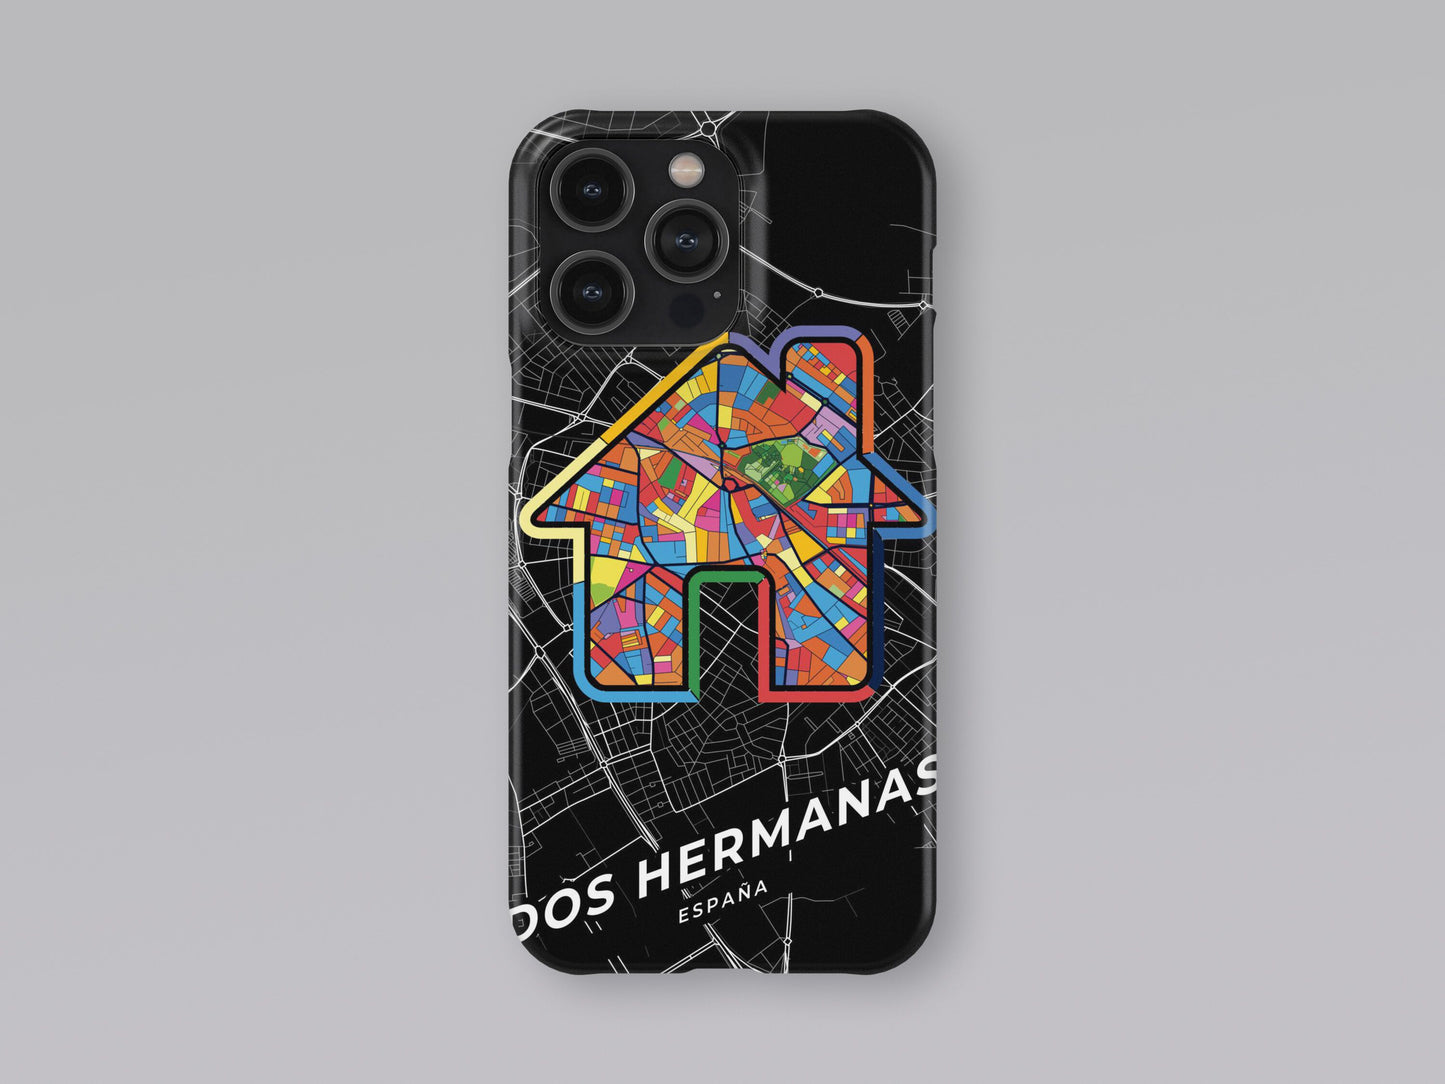 Dos Hermanas Spain slim phone case with colorful icon. Birthday, wedding or housewarming gift. Couple match cases. 3